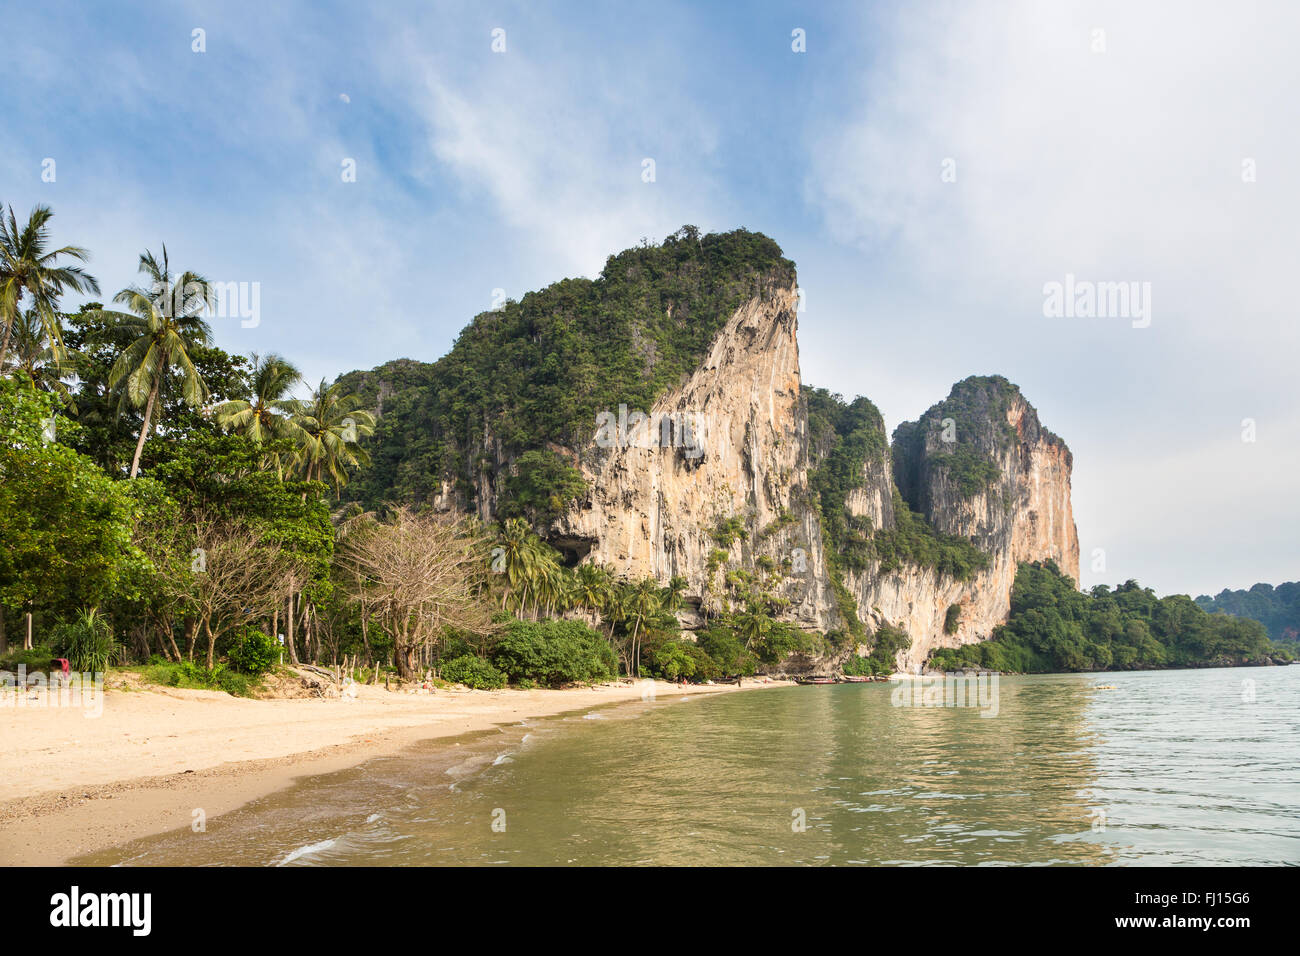 The stunning landscape made of karst formations, the Ton Sai beach and jungle around Railey in Krabi province in south Thailand Stock Photo